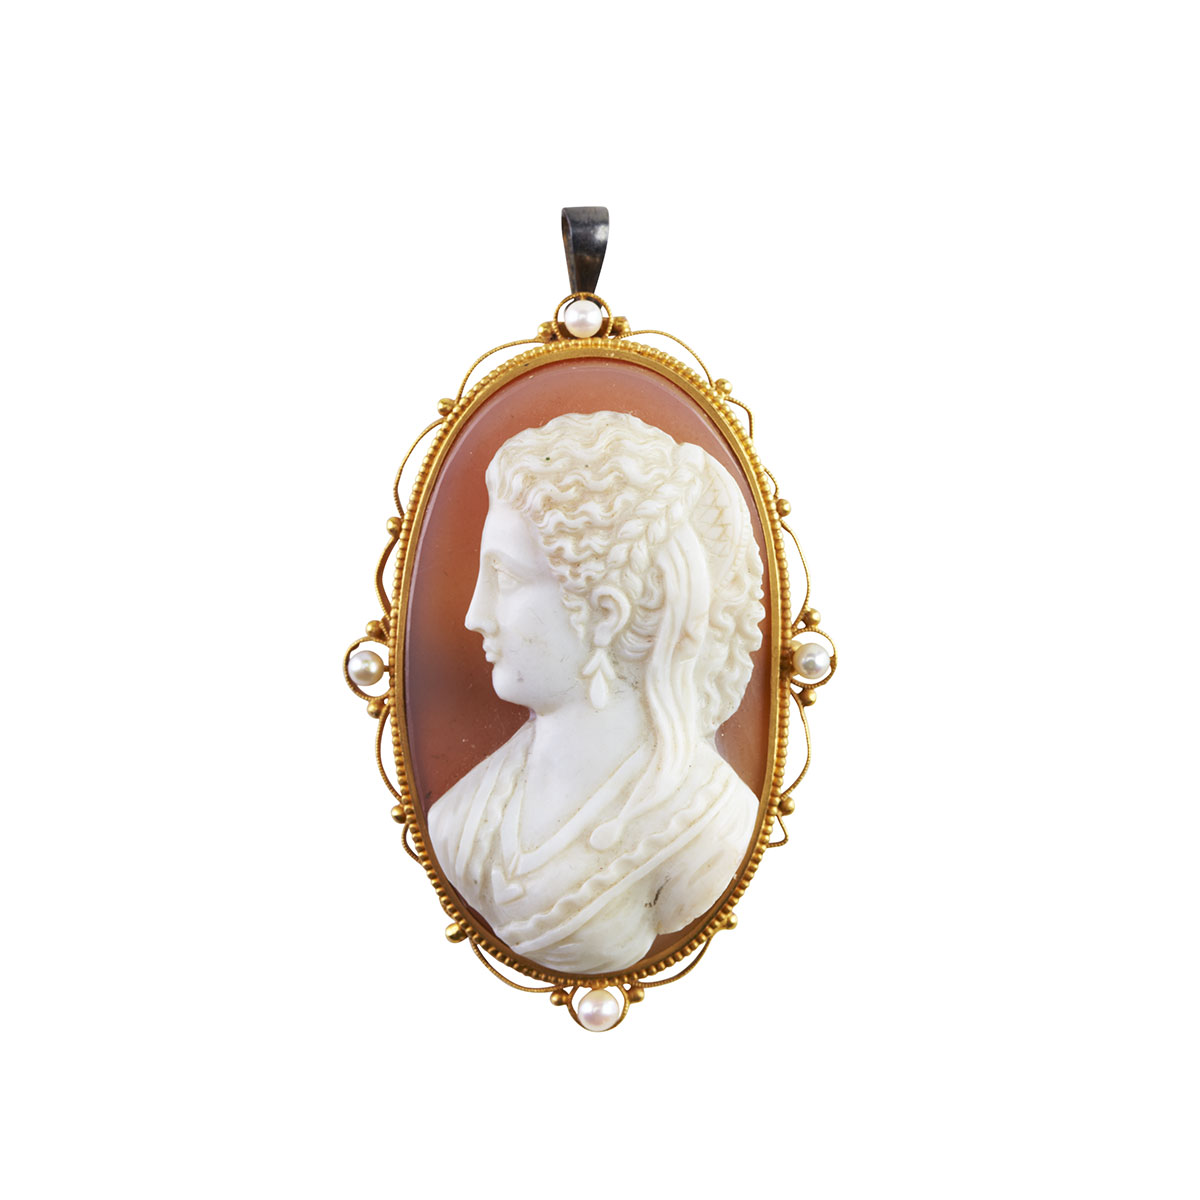 Oval Carved Hardstone Cameo    in an